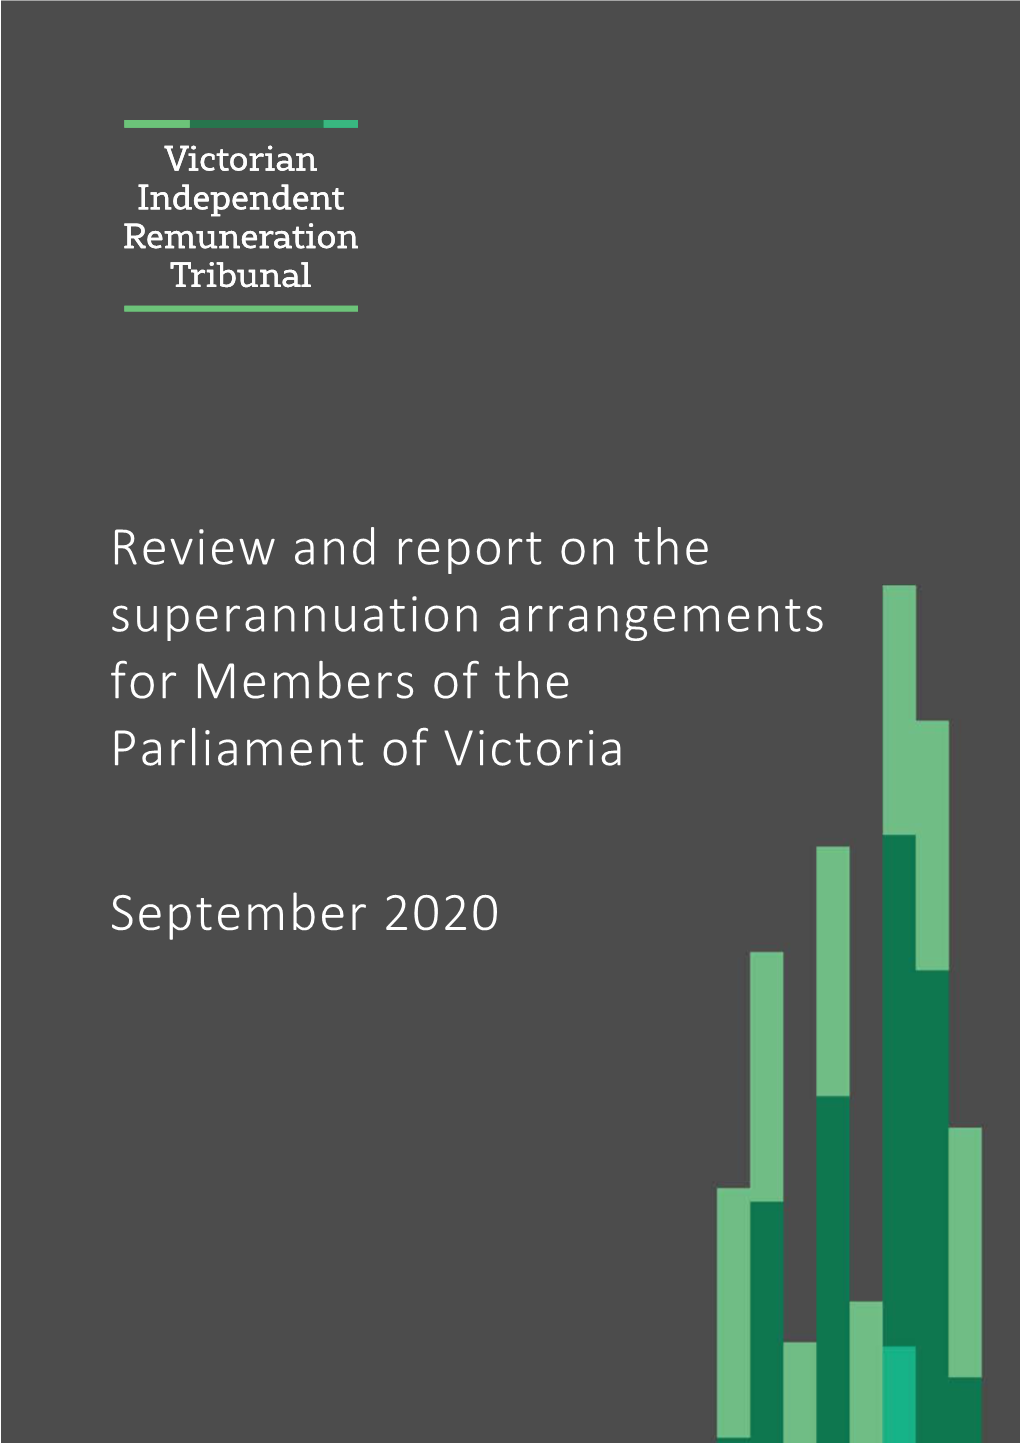 Review and Report on the Superannuation Arrangements for Members of the Parliament of Victoria